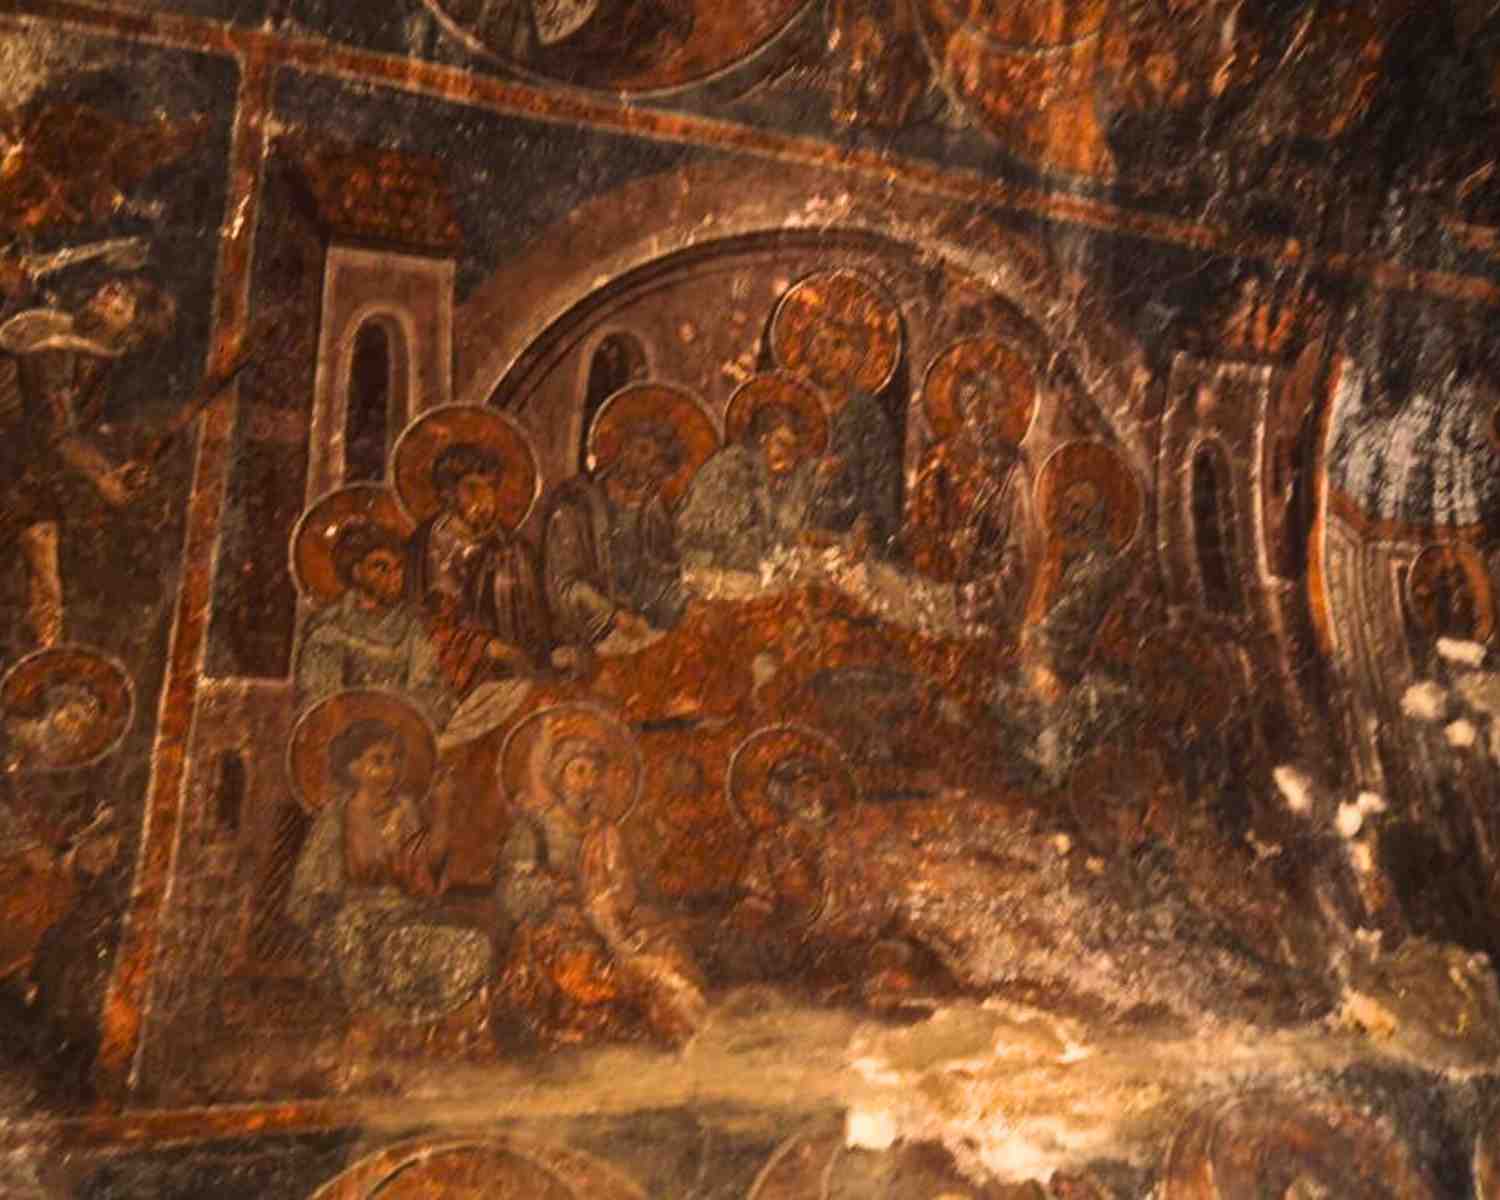 More of the frescoes inside the cave churches